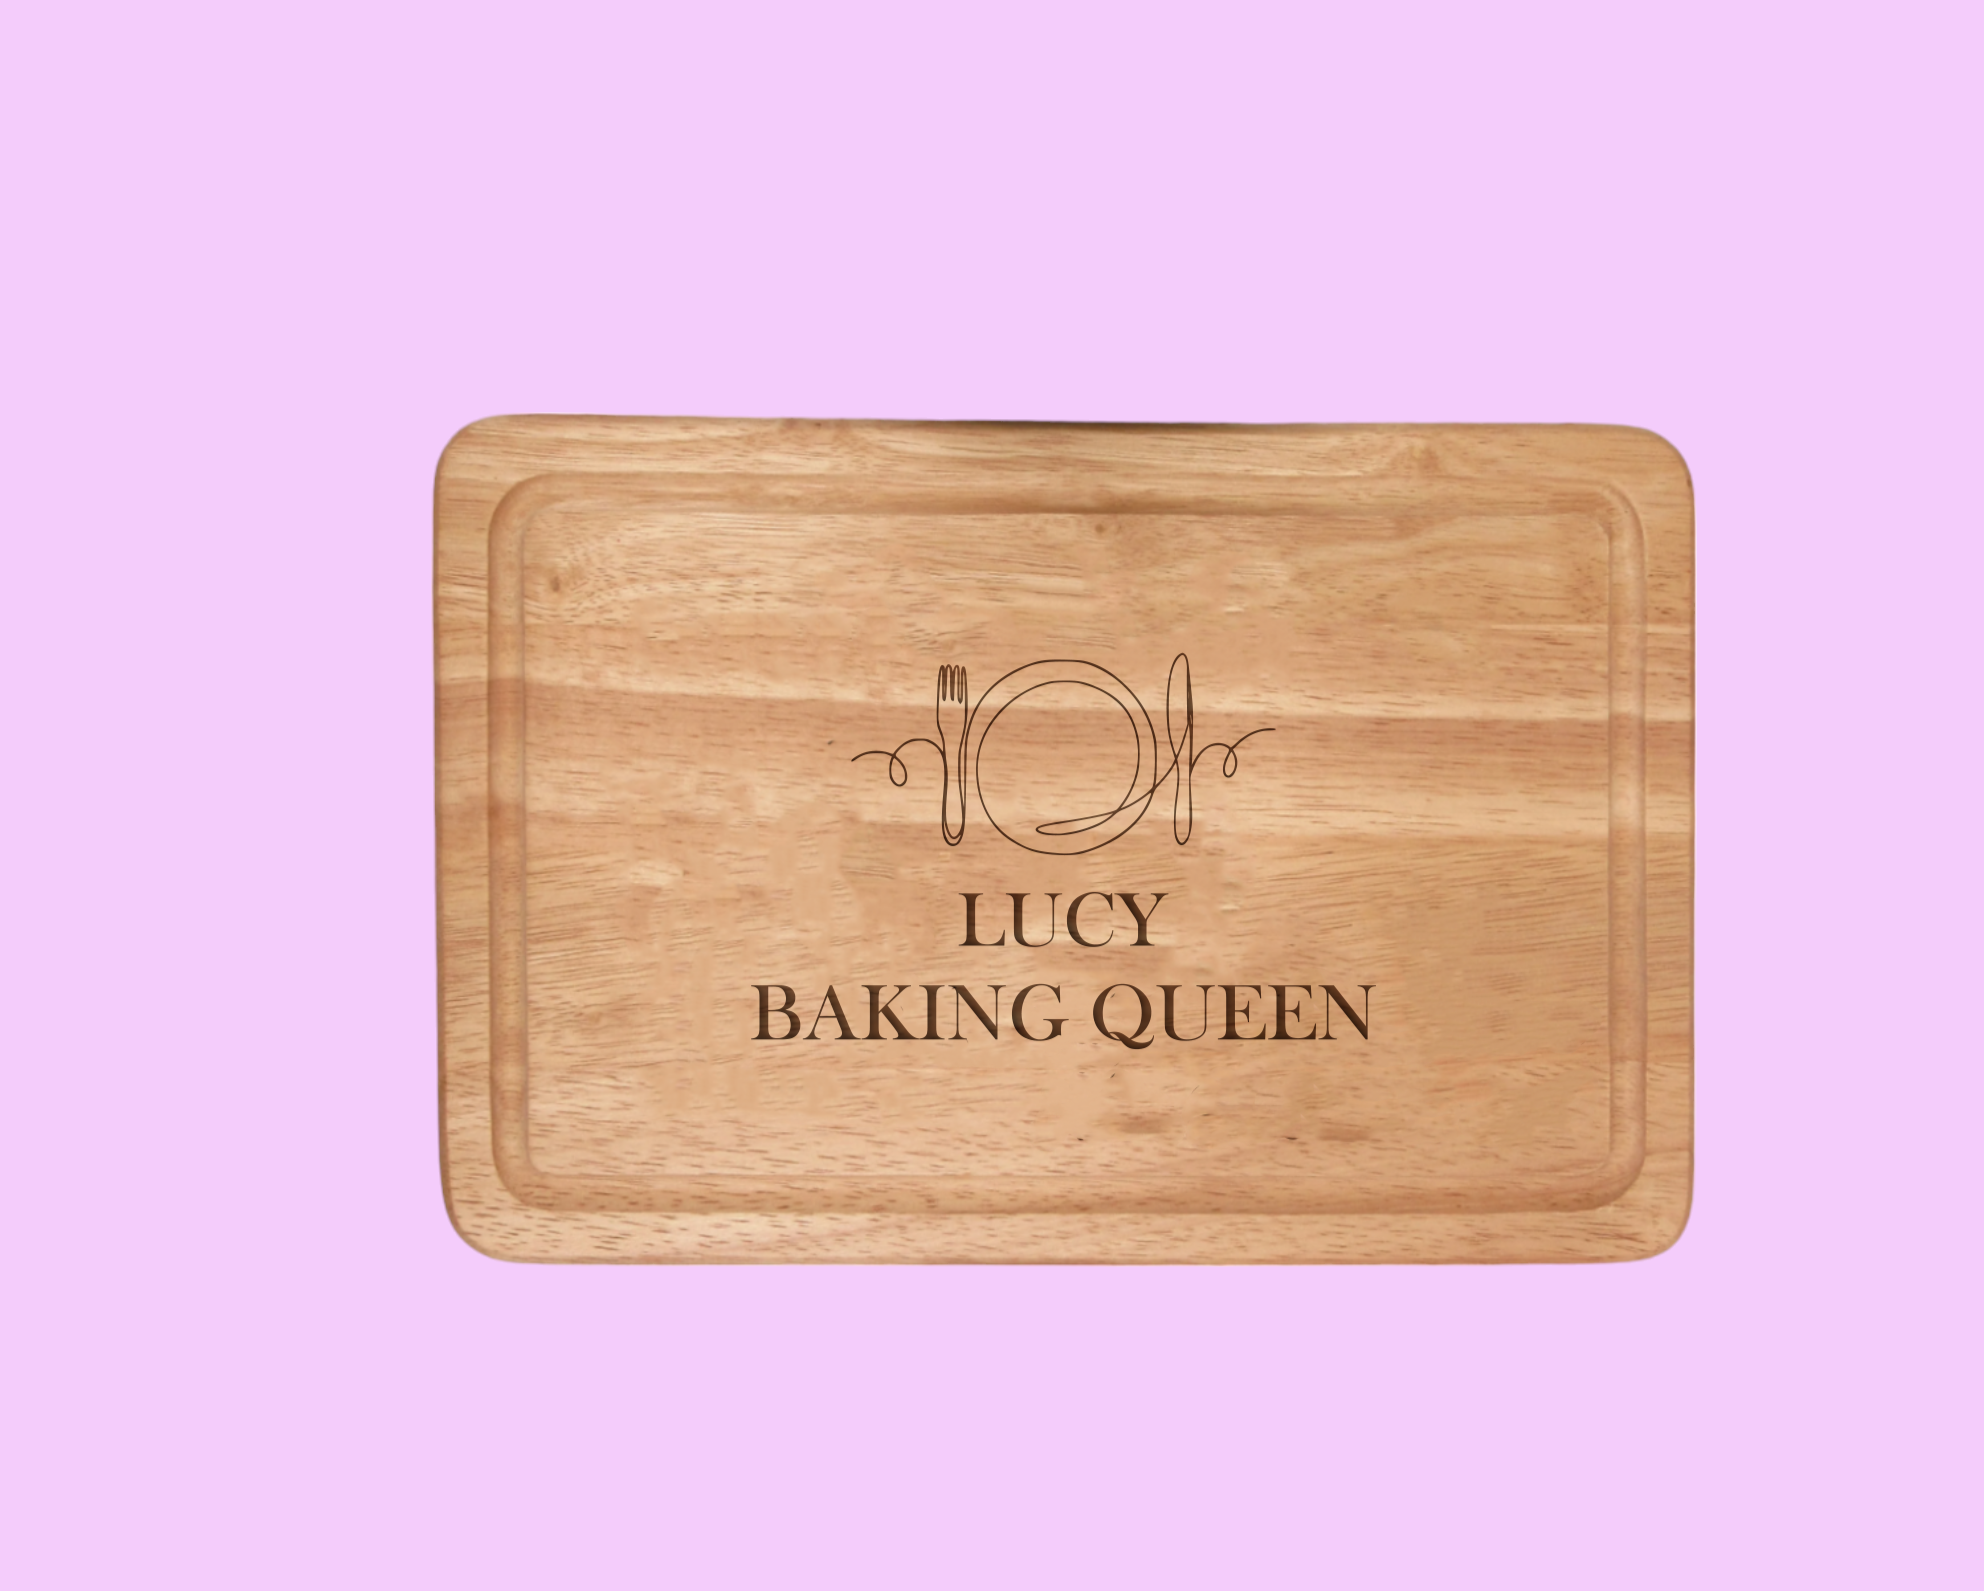 Transform your kitchen with our Personalised Chopping Board Knife & Fork Design. Add 2 lines of text (max 20 characters each in caps) on this 300mmX200mm premium wood board. An ideal gift for housewarmings or special occasions, it brings personalized perfection to your cooking. Versatile and elegant, create a unique culinary experience. Tip: Hand-wash only for lasting allure.